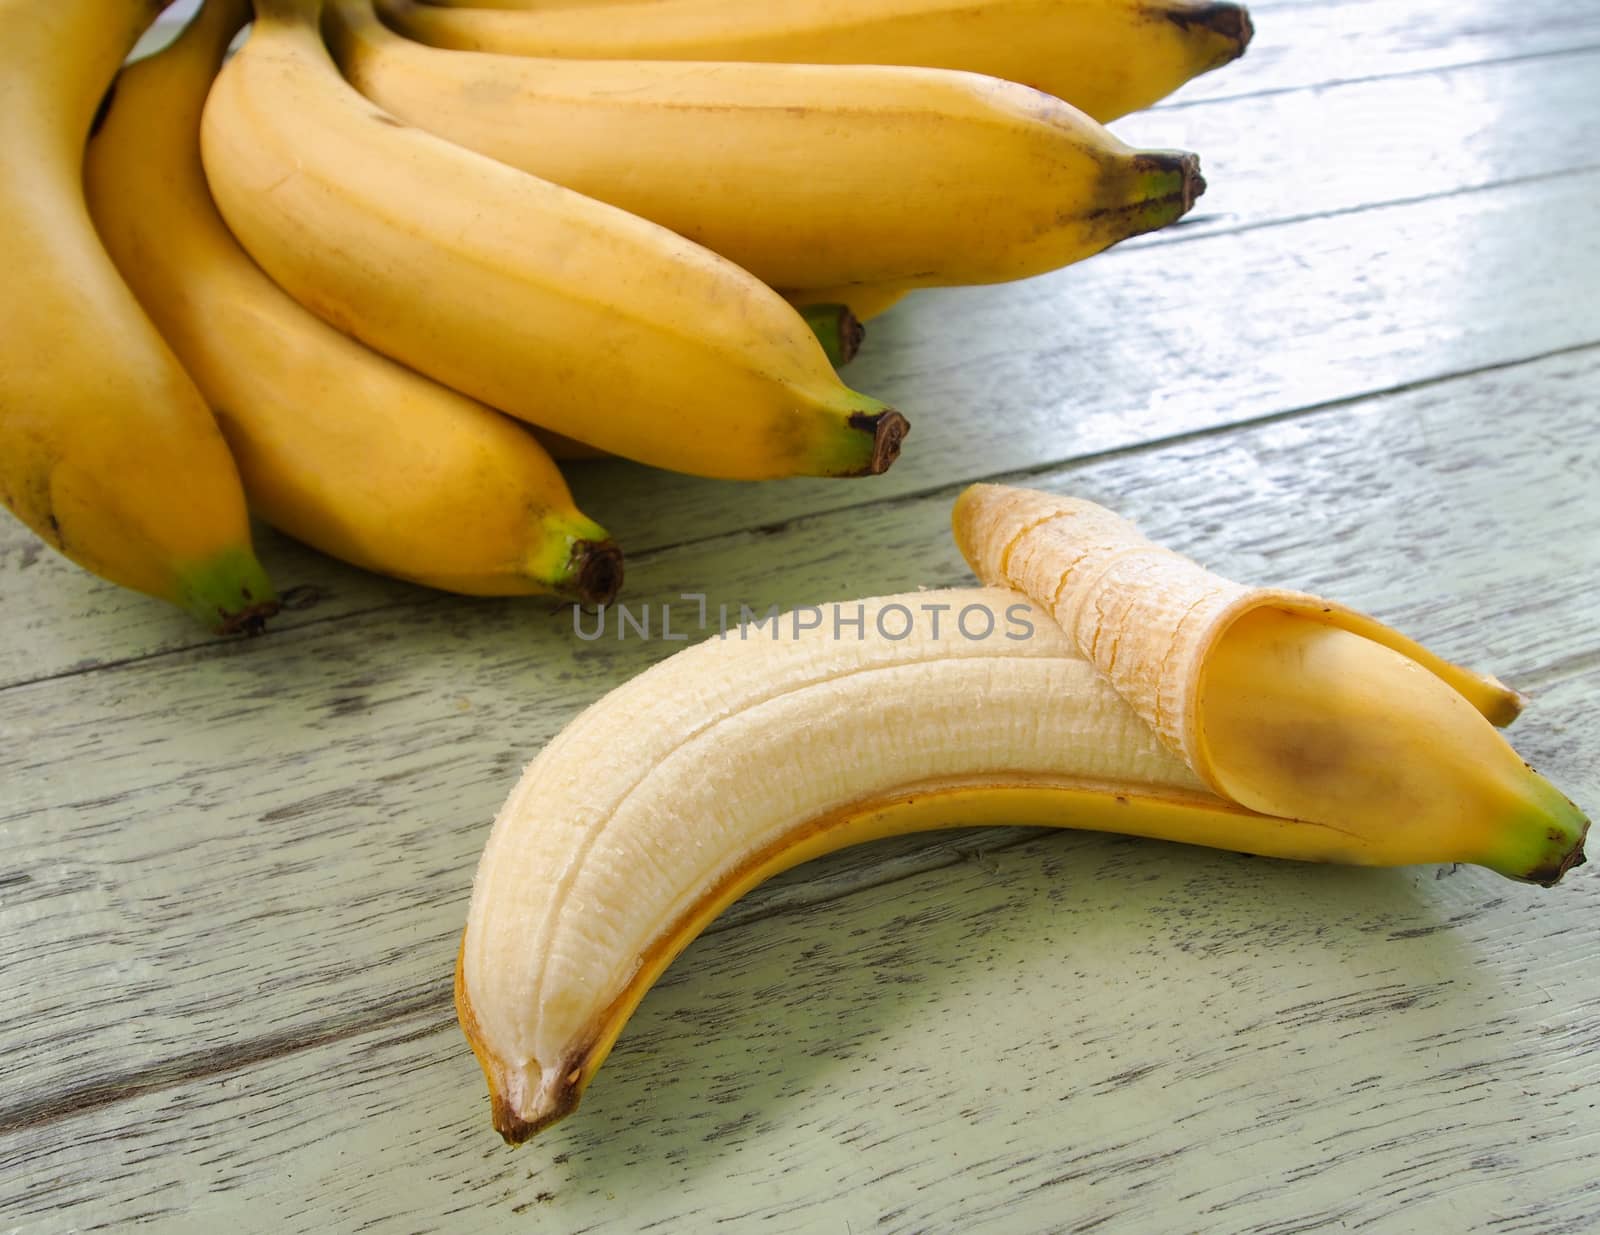 Banana  placed on a wooden table.